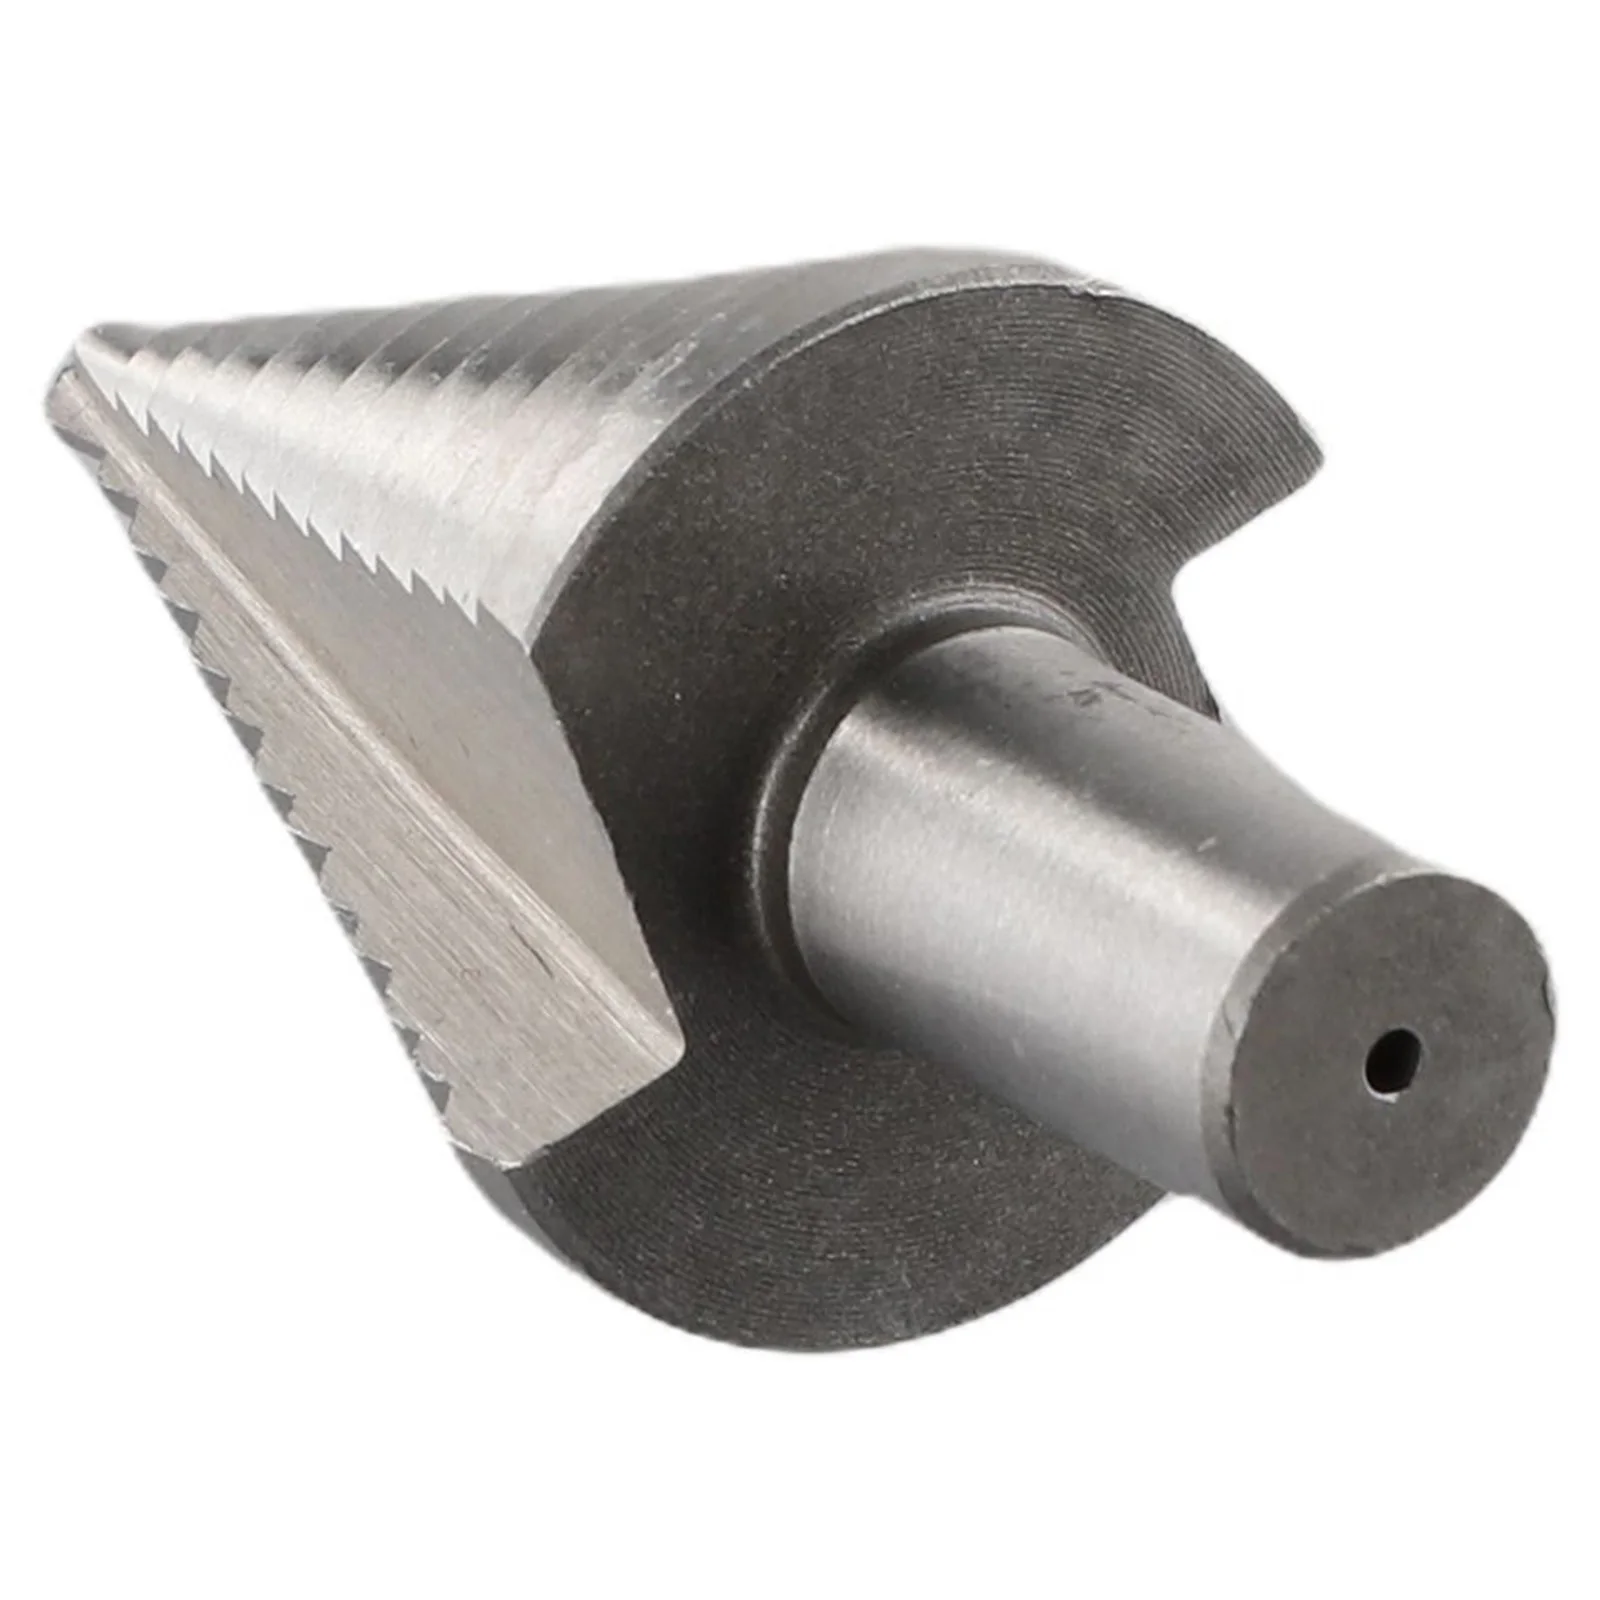 

HSS Step Drill Bit, 13 Steps Size Cone Drills, Coated, 535mm Length, Fast Drilling in Steel, Wood, Thin Iron Silver